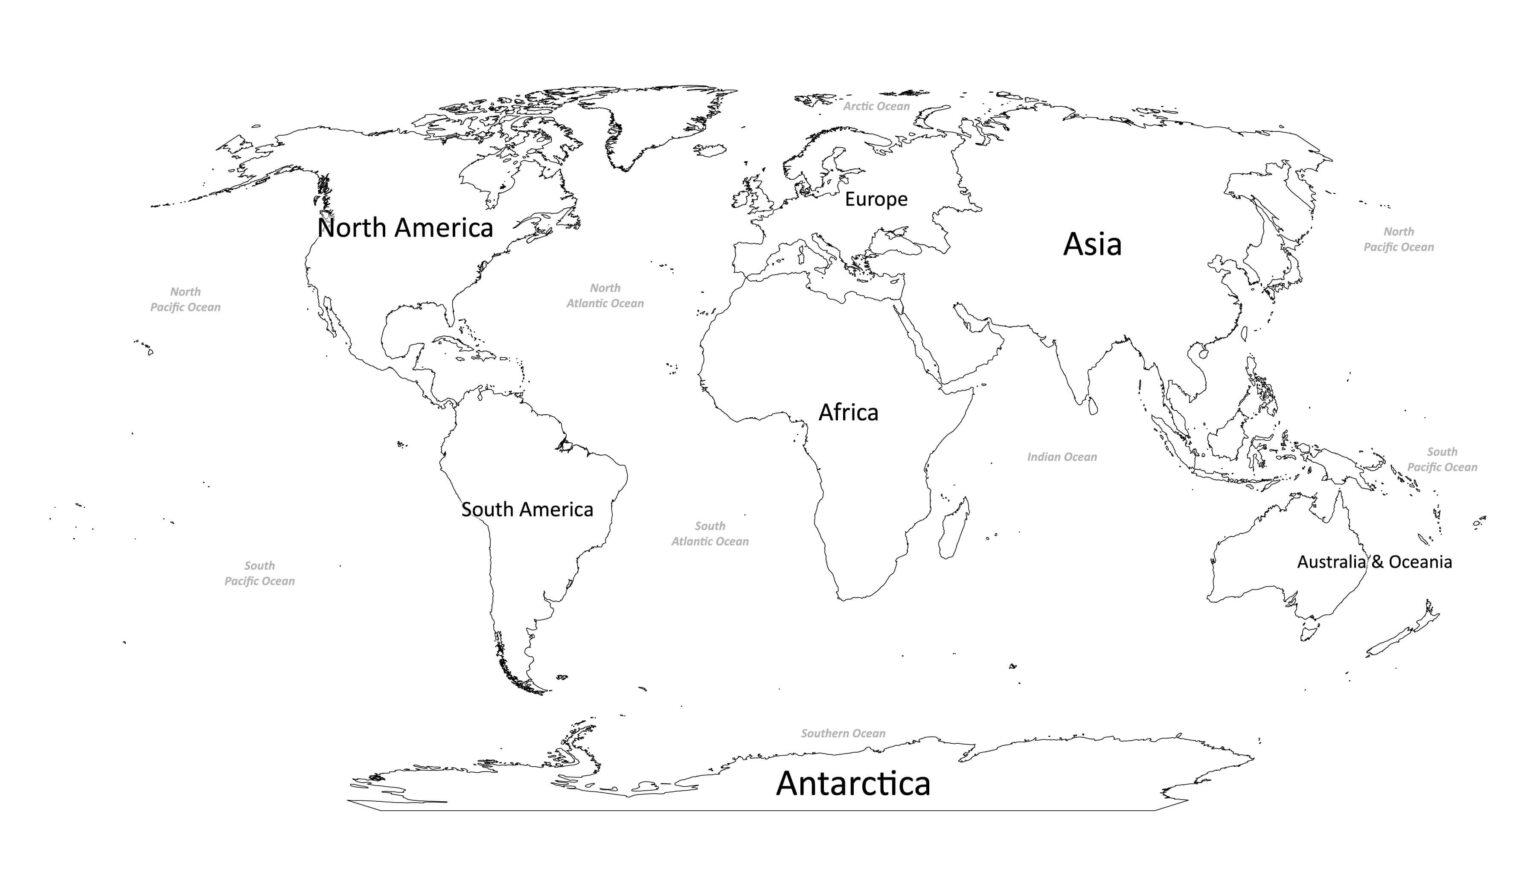 Labeled World map with continents | Labeled Maps